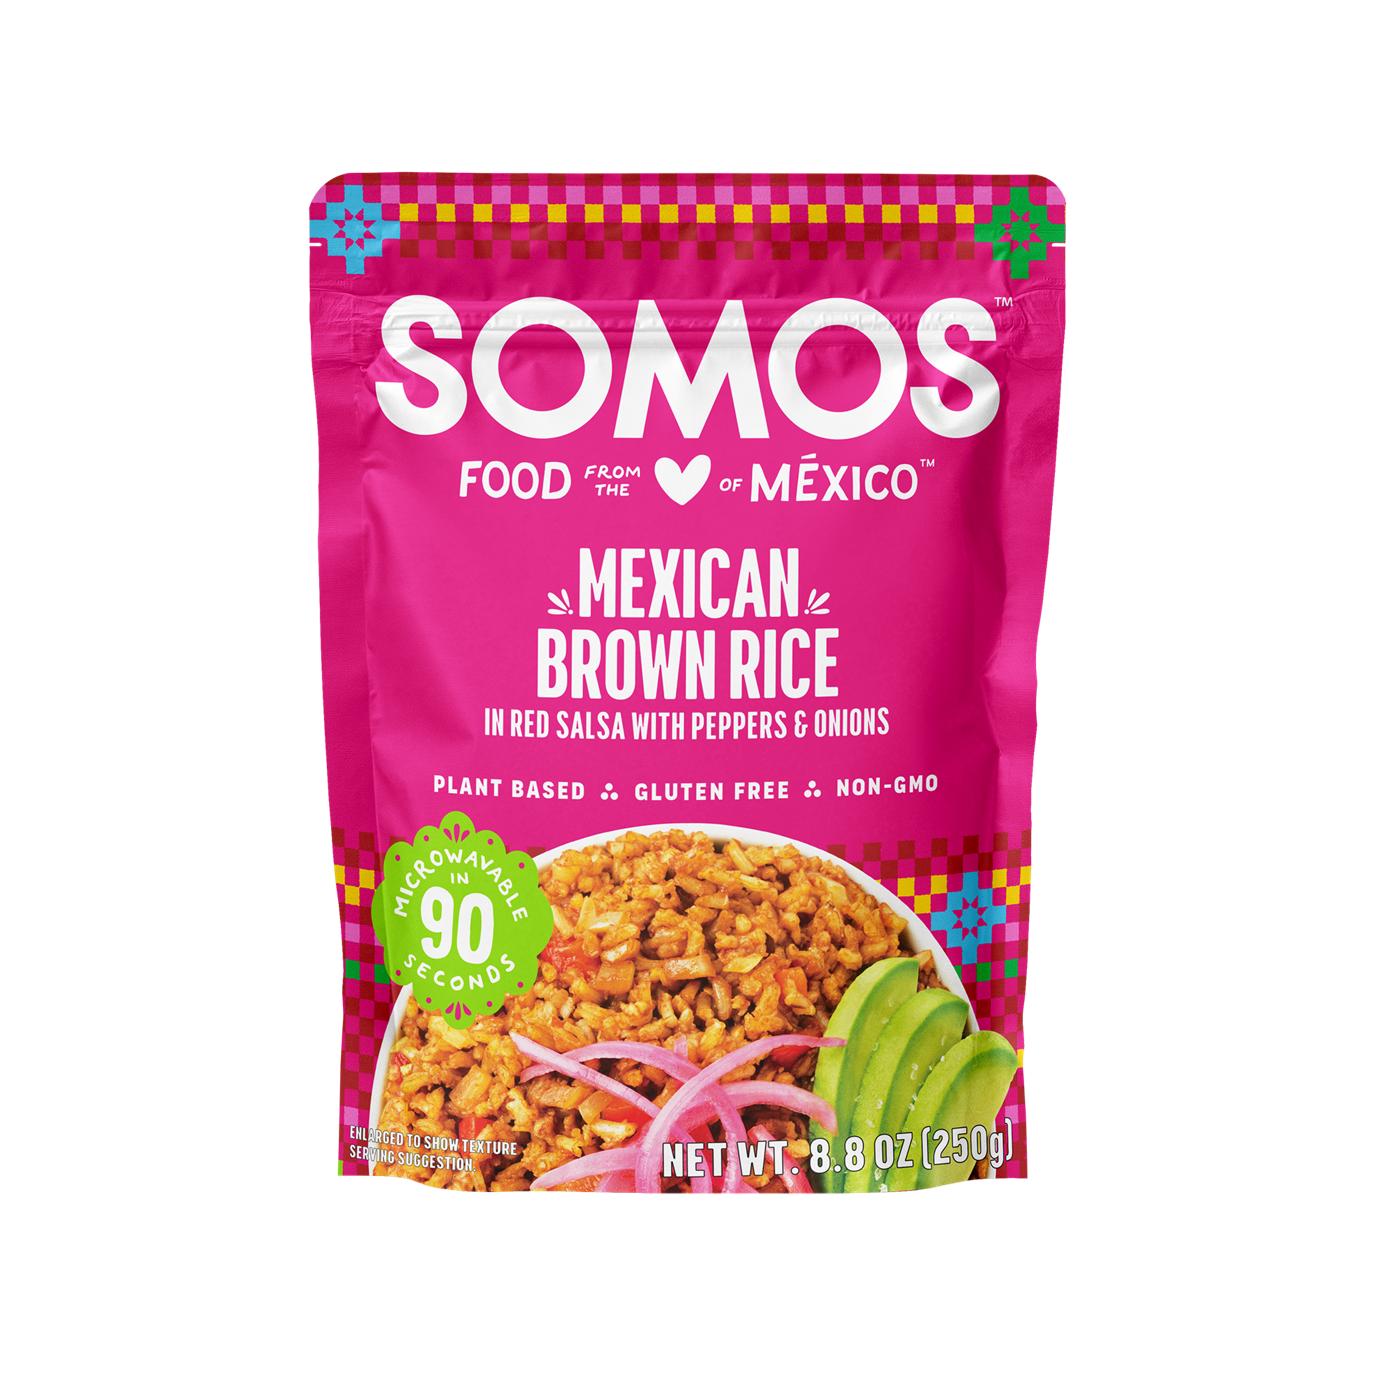 Ben's Original Mexican Style Microwave Rice Pouch 250g